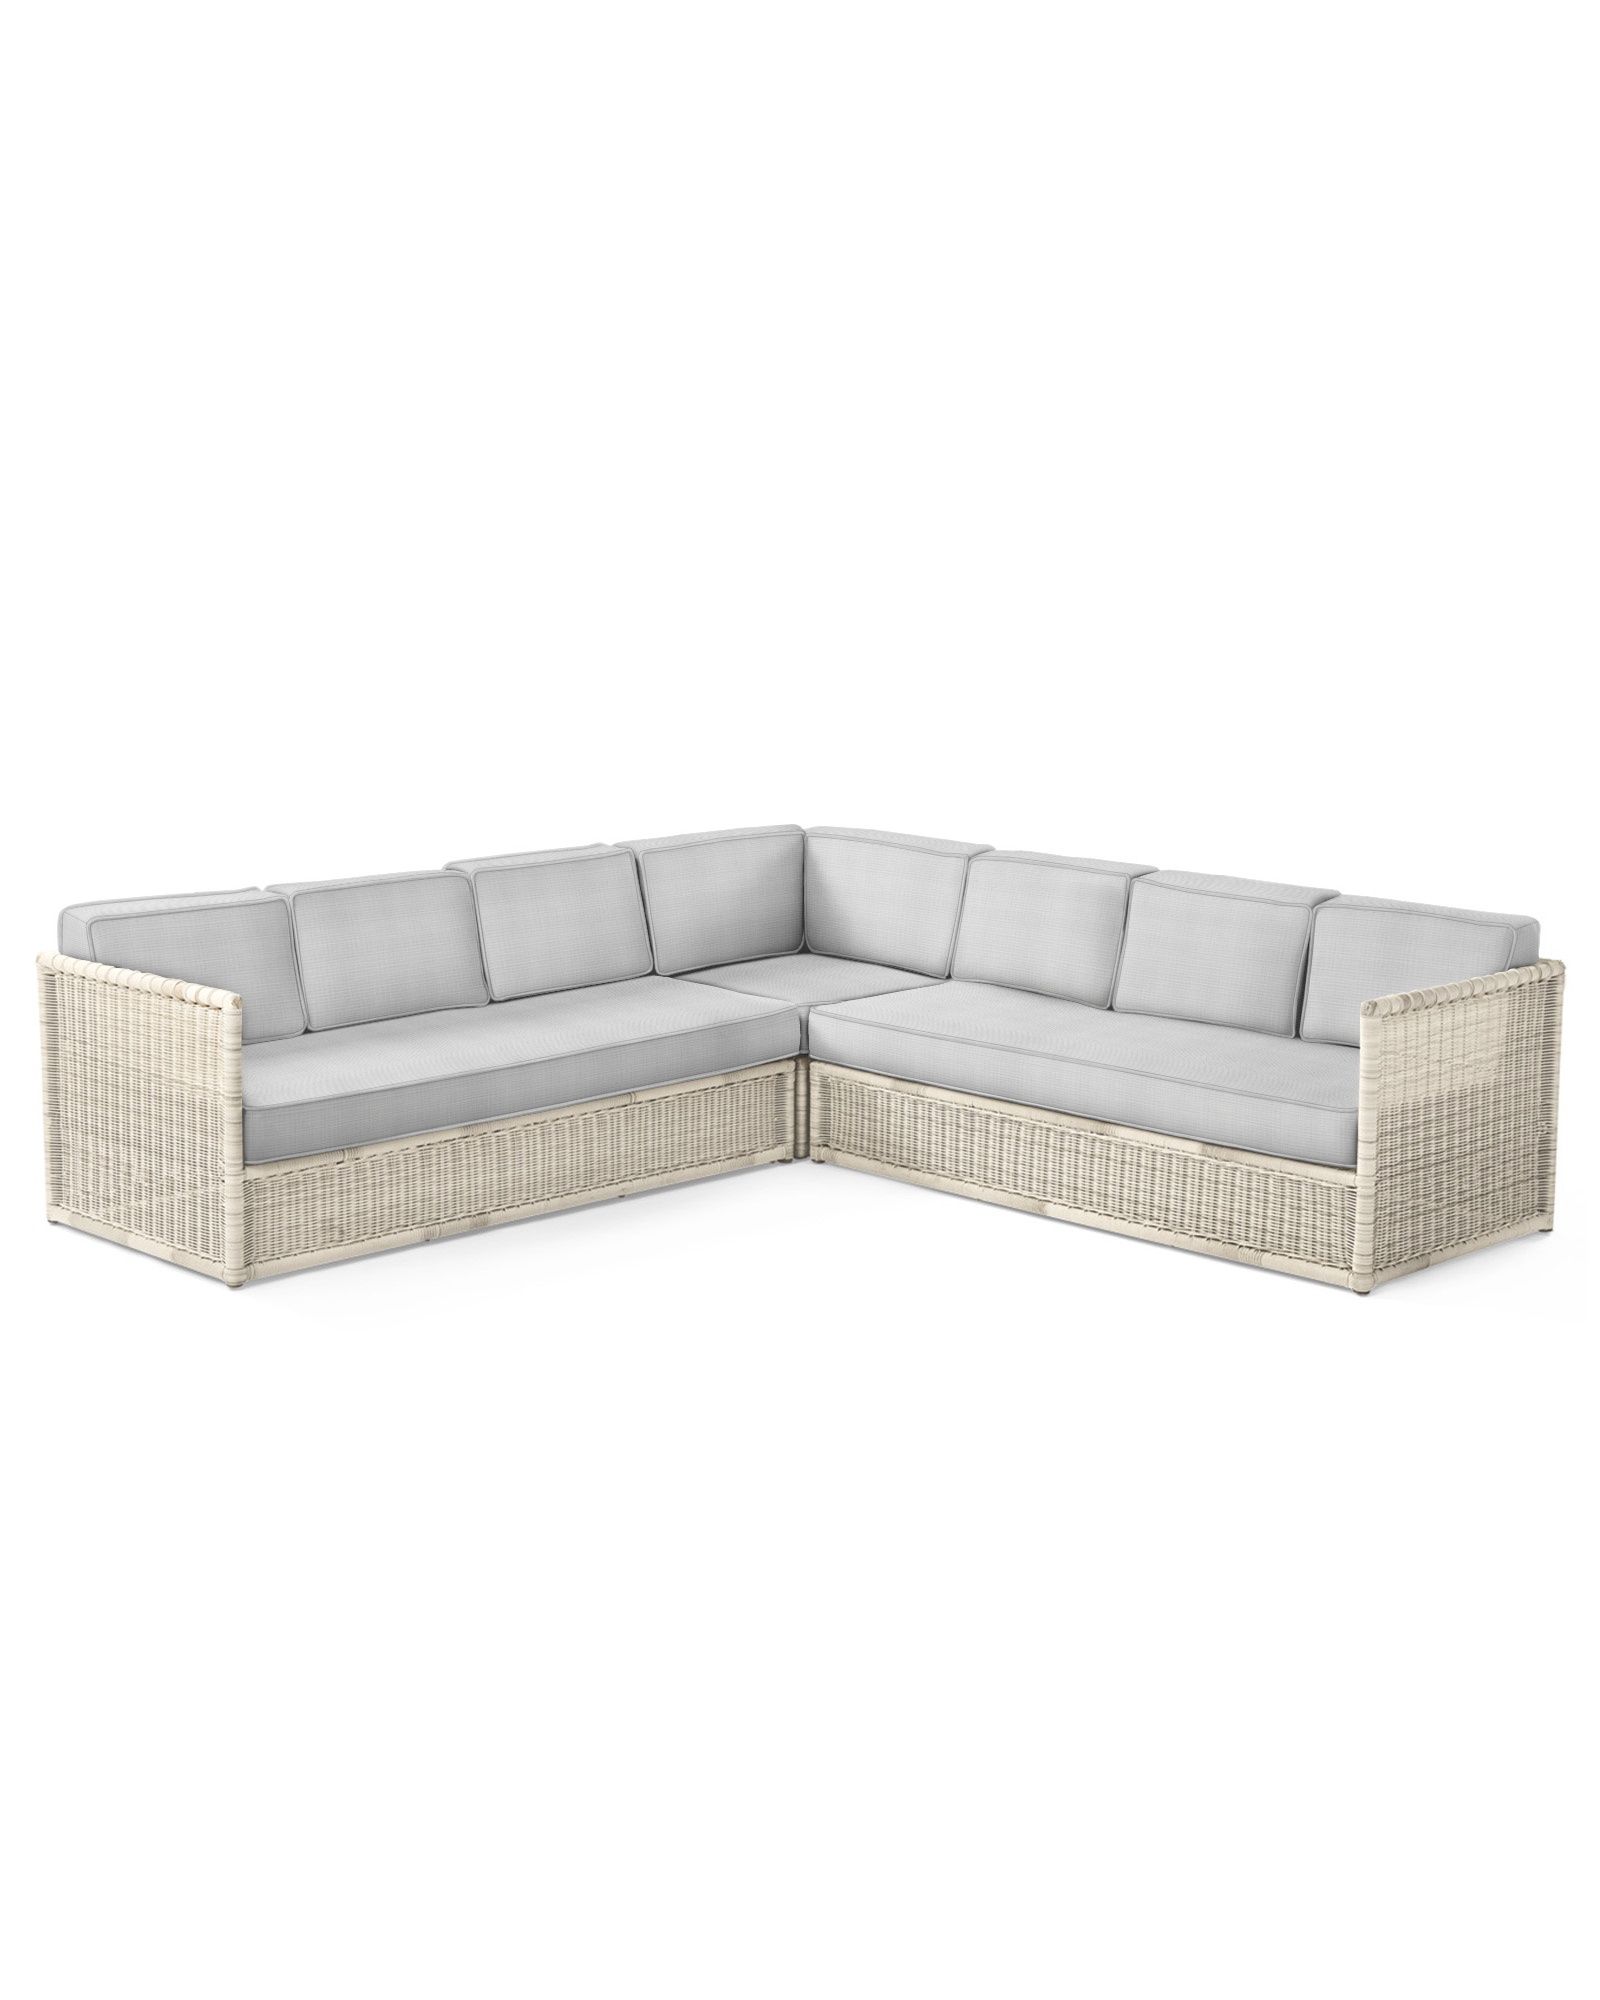 Pacifica Corner Sectional - Driftwood | Serena and Lily